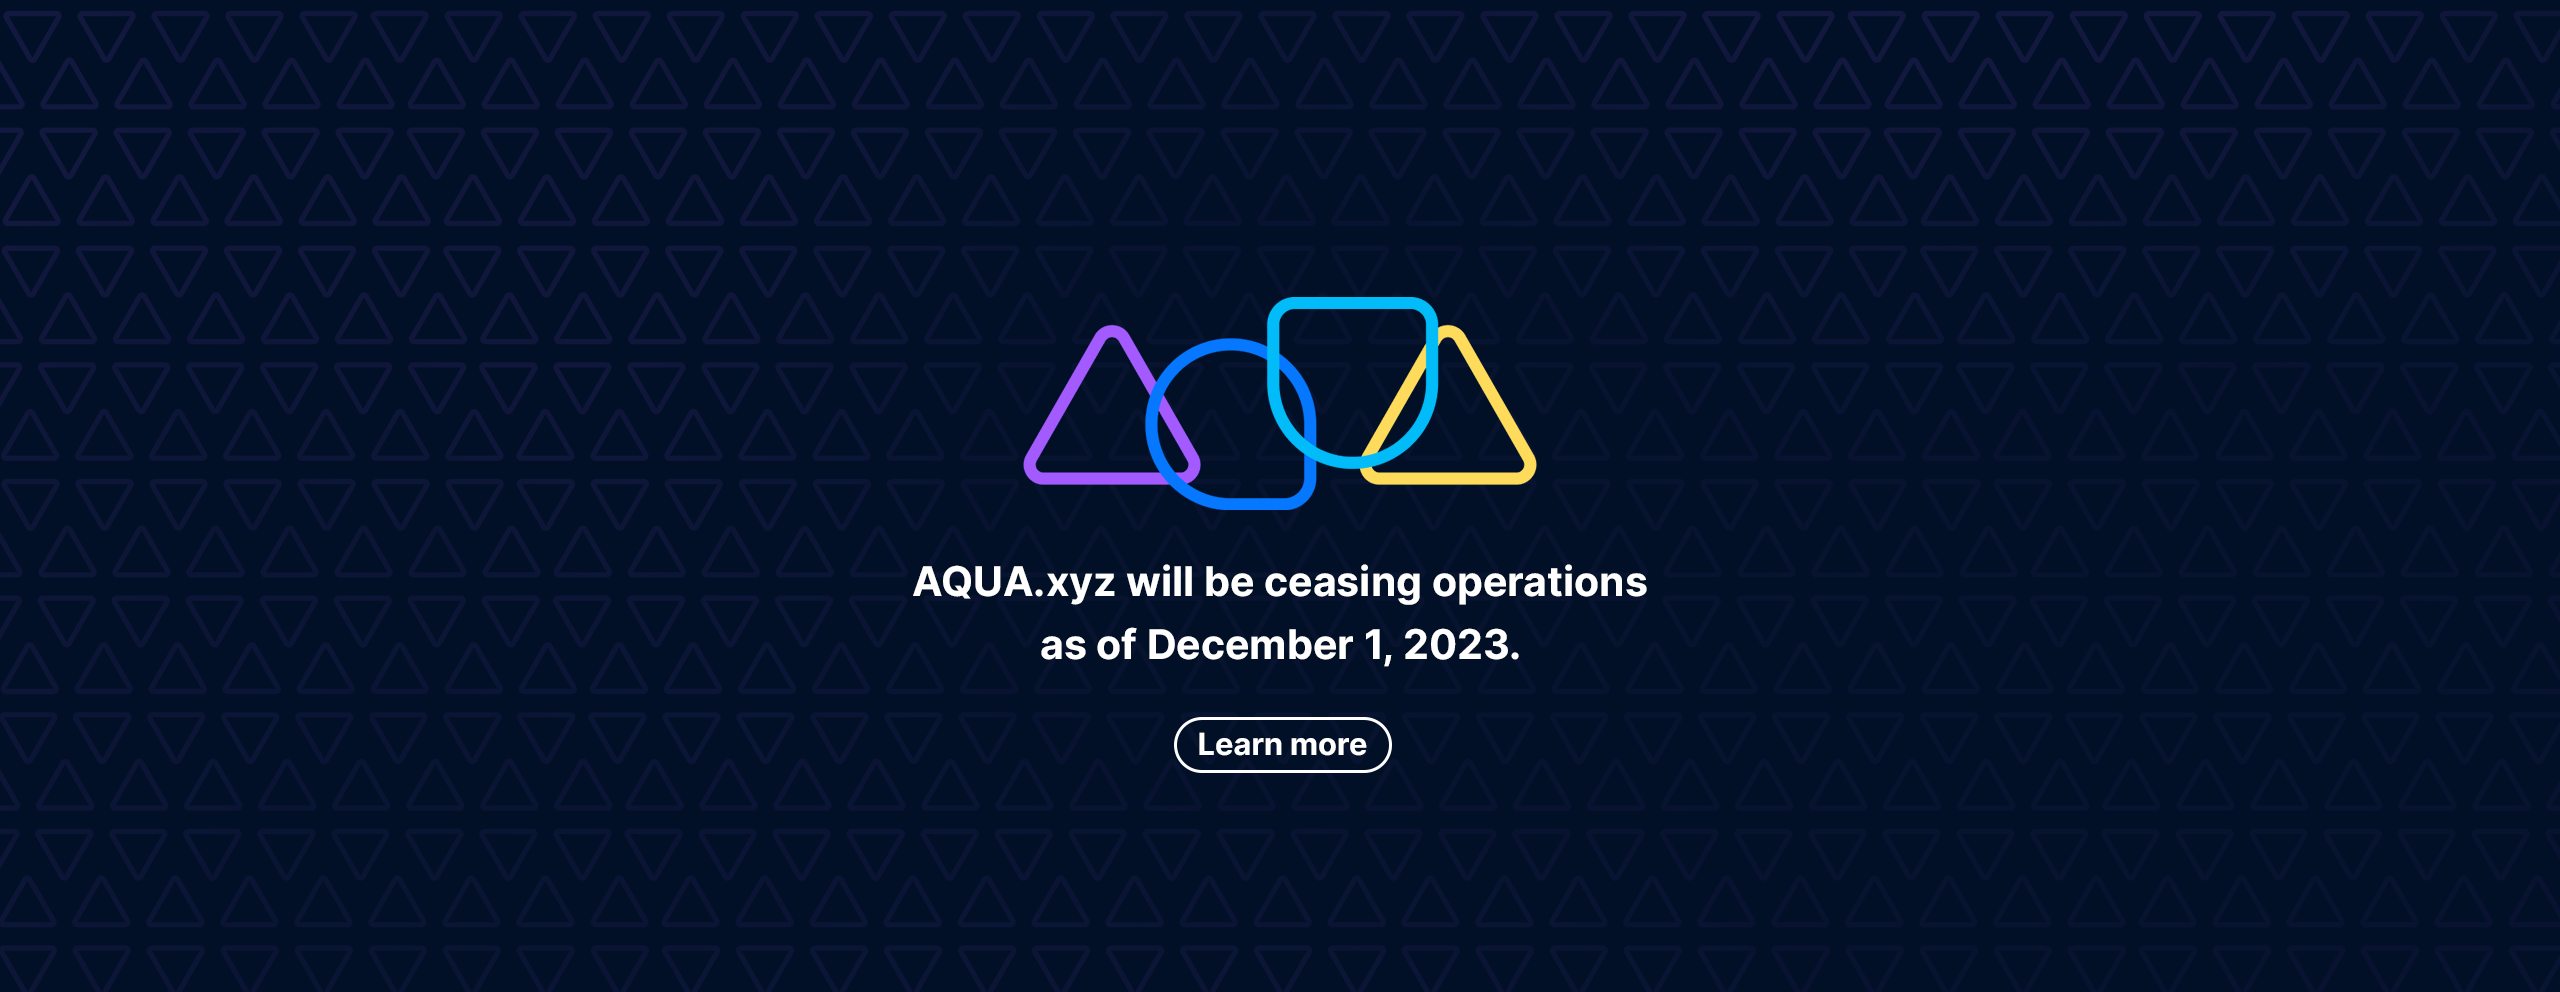 AQUA.xyz on X: Sign up today for a chance to win a Red Envelope prize  drop! 🧧 A few lucky winners will receive an awesome surprise of tokens and  NFTs across your